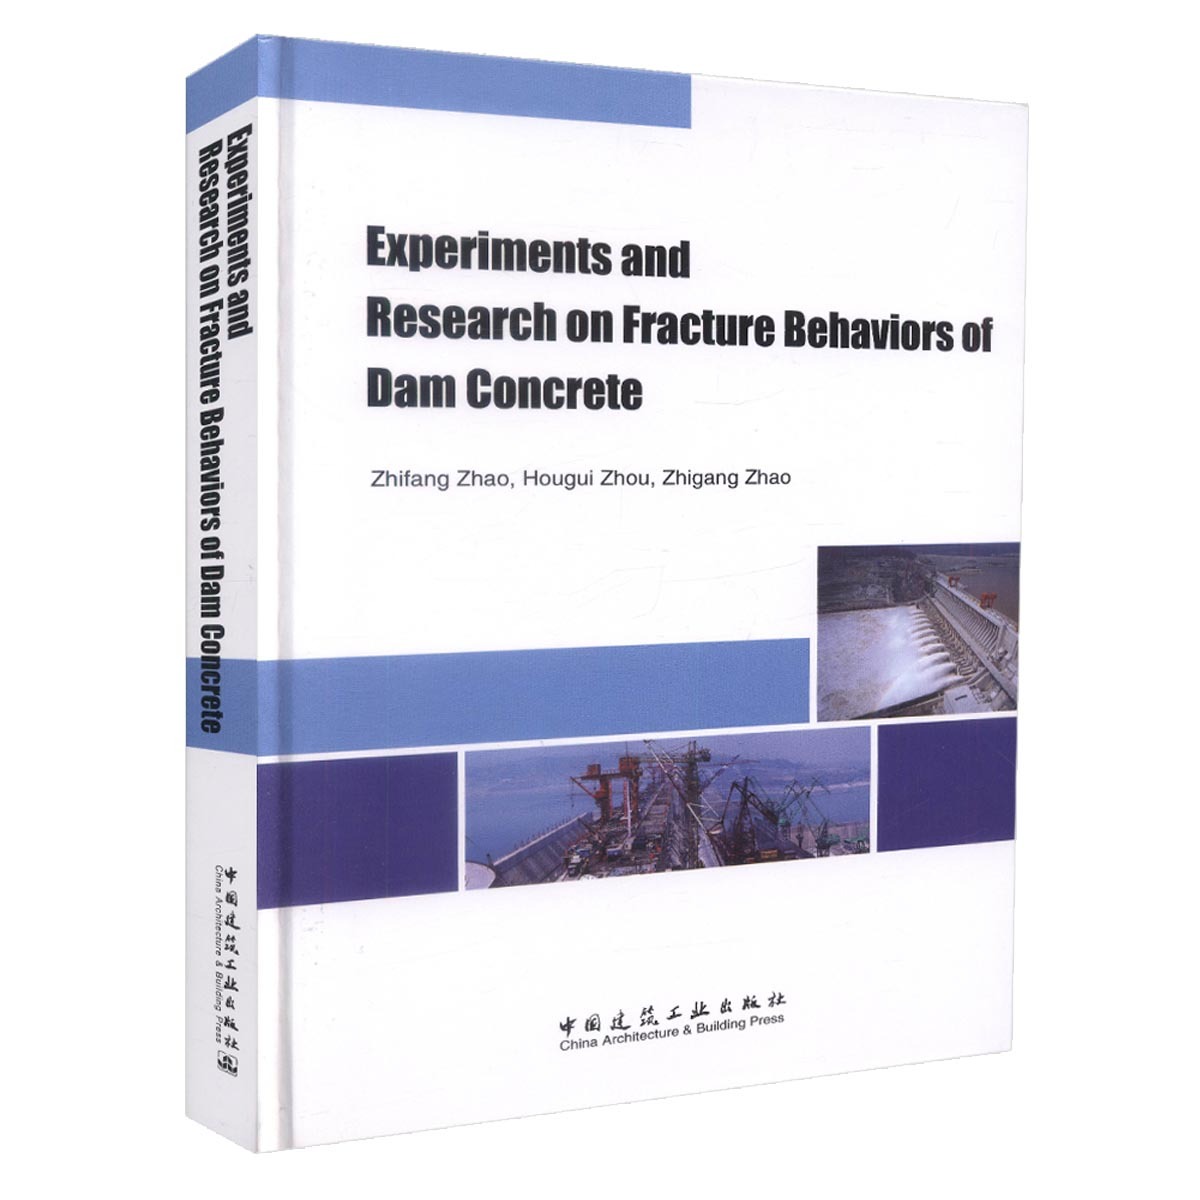 Experiments and Research on Fracture Behaviors of Dam Concrete